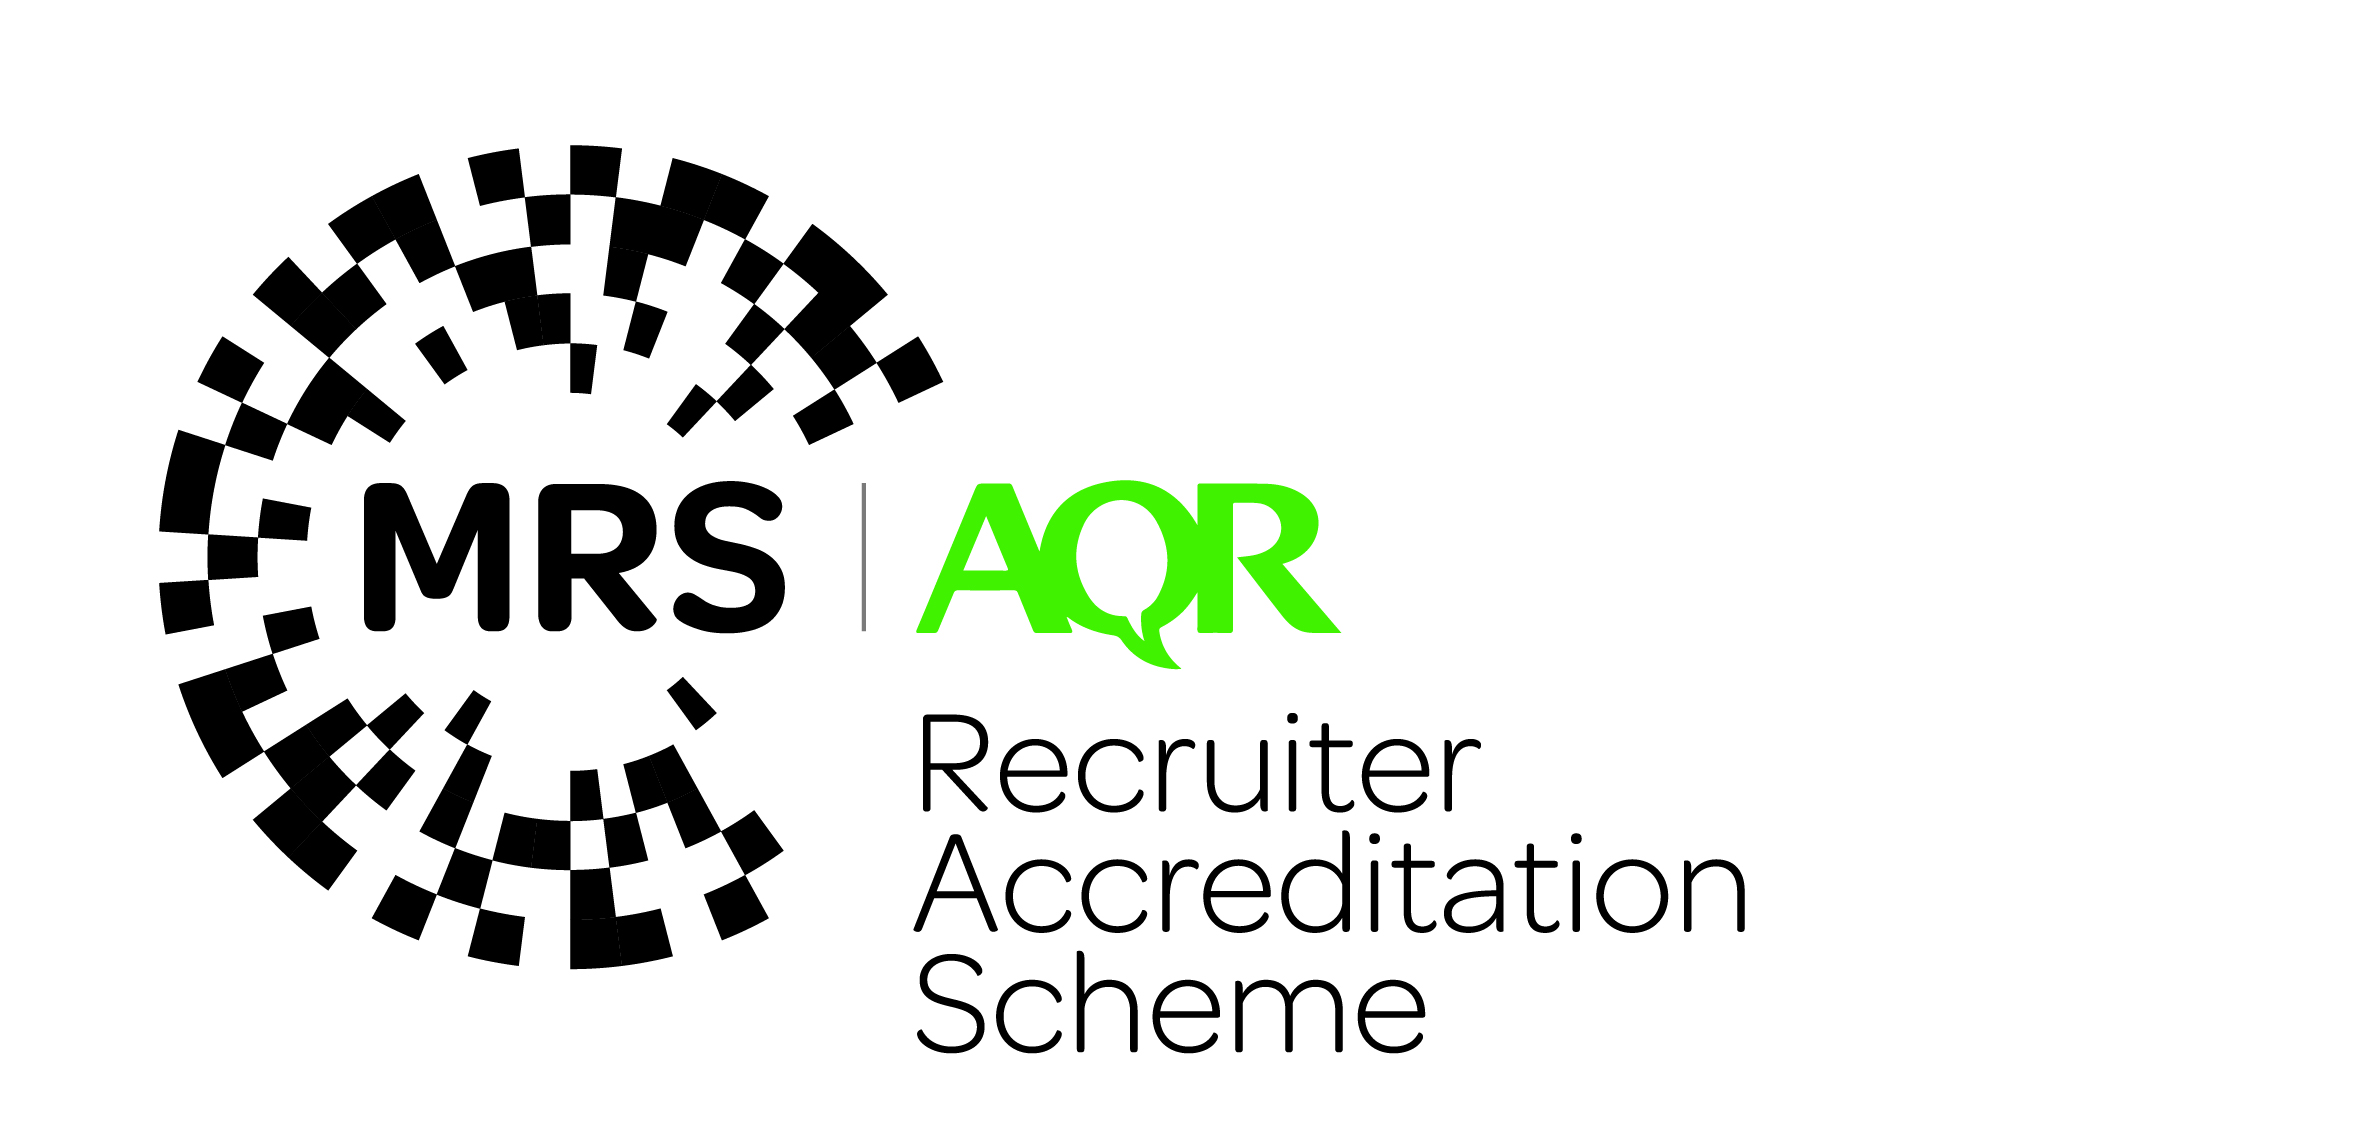 research and analysis service (ras) recruitment